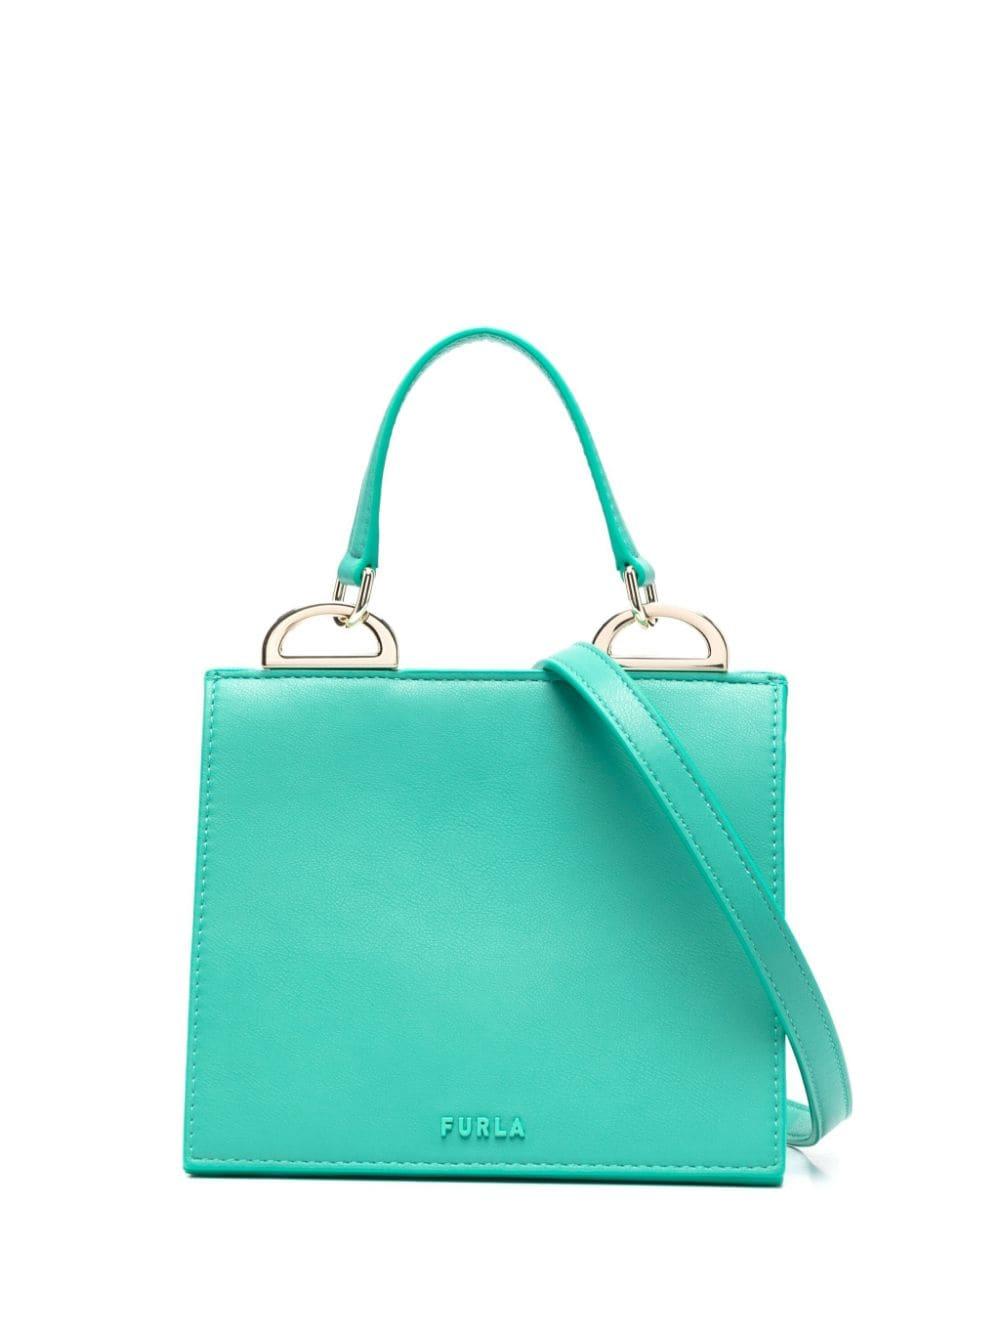 Furla Emma S Leather Tote Bag in Blue | Lyst